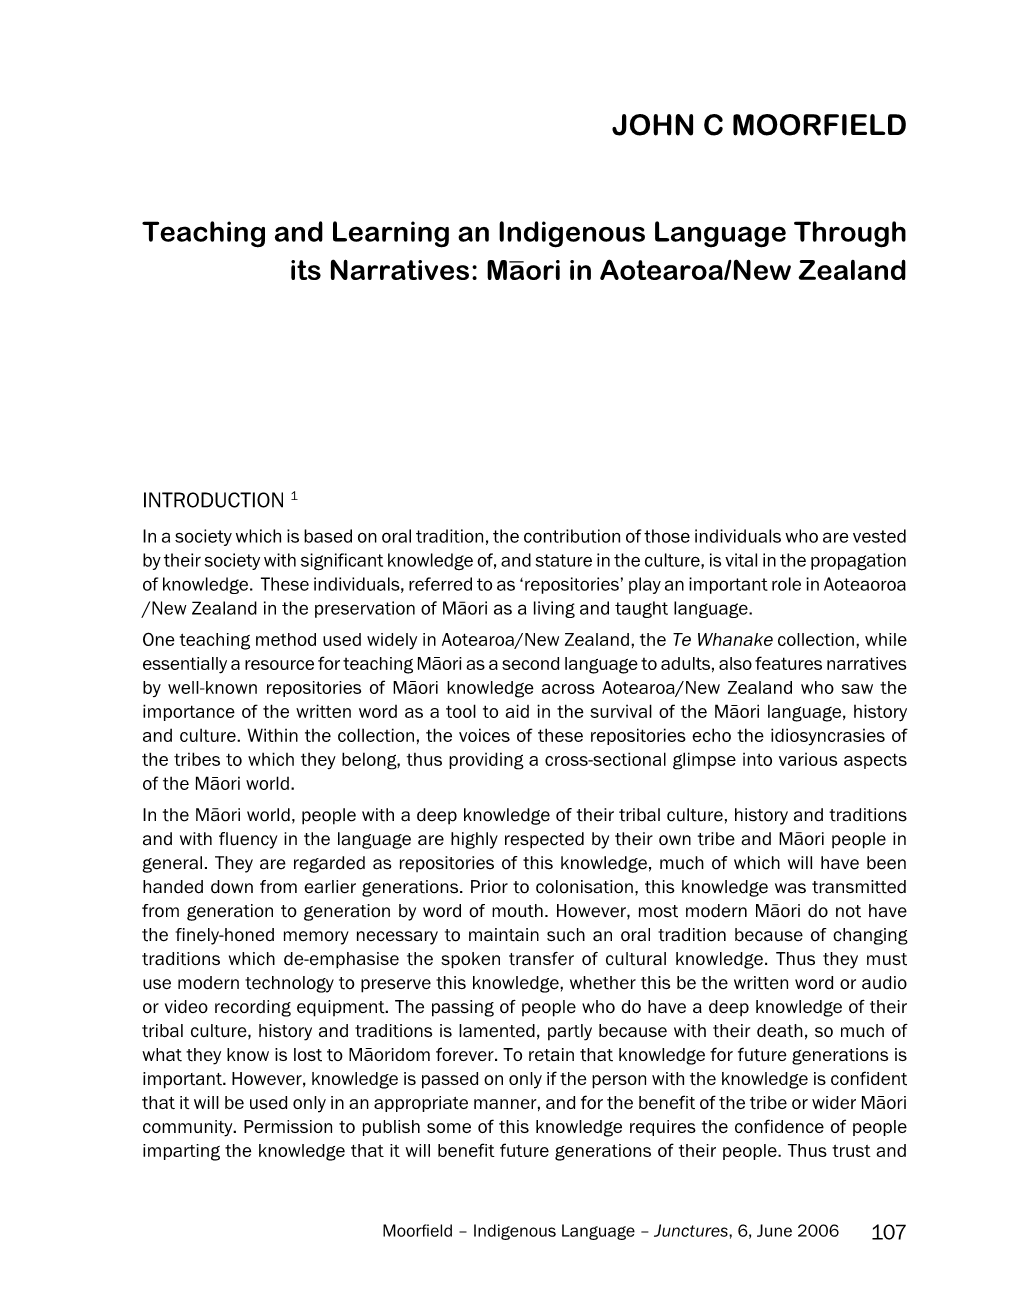 Teaching and Learning an Indigenous Language Through Its Narratives: Máori in Aotearoa/New Zealand